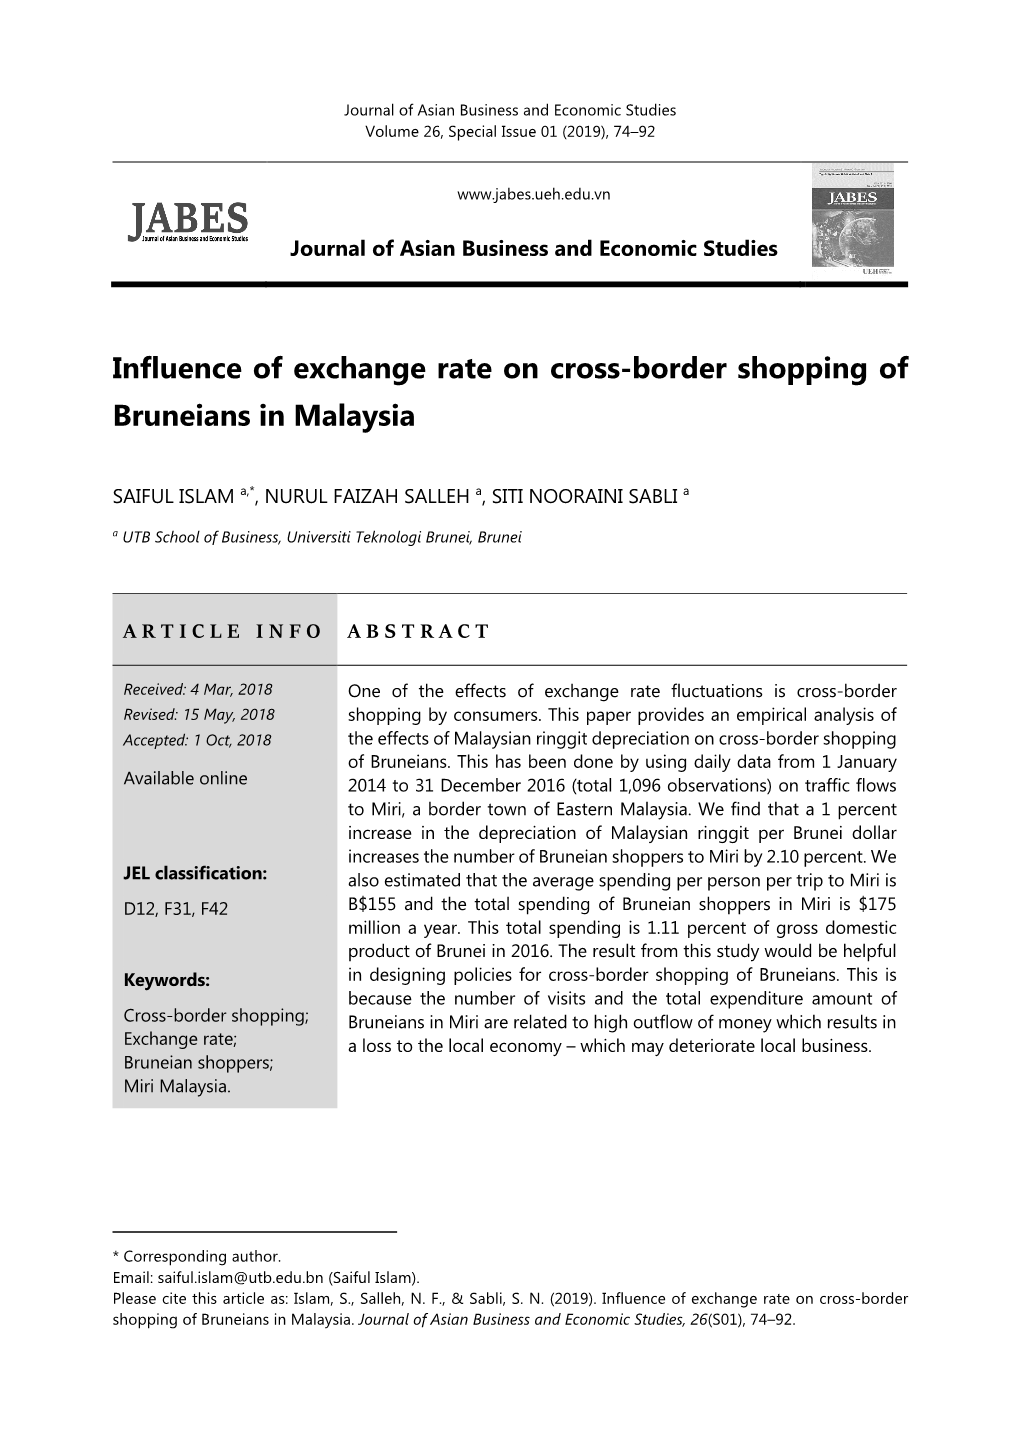 Influence of Exchange Rate on Cross-Border Shopping of Bruneians in Malaysia